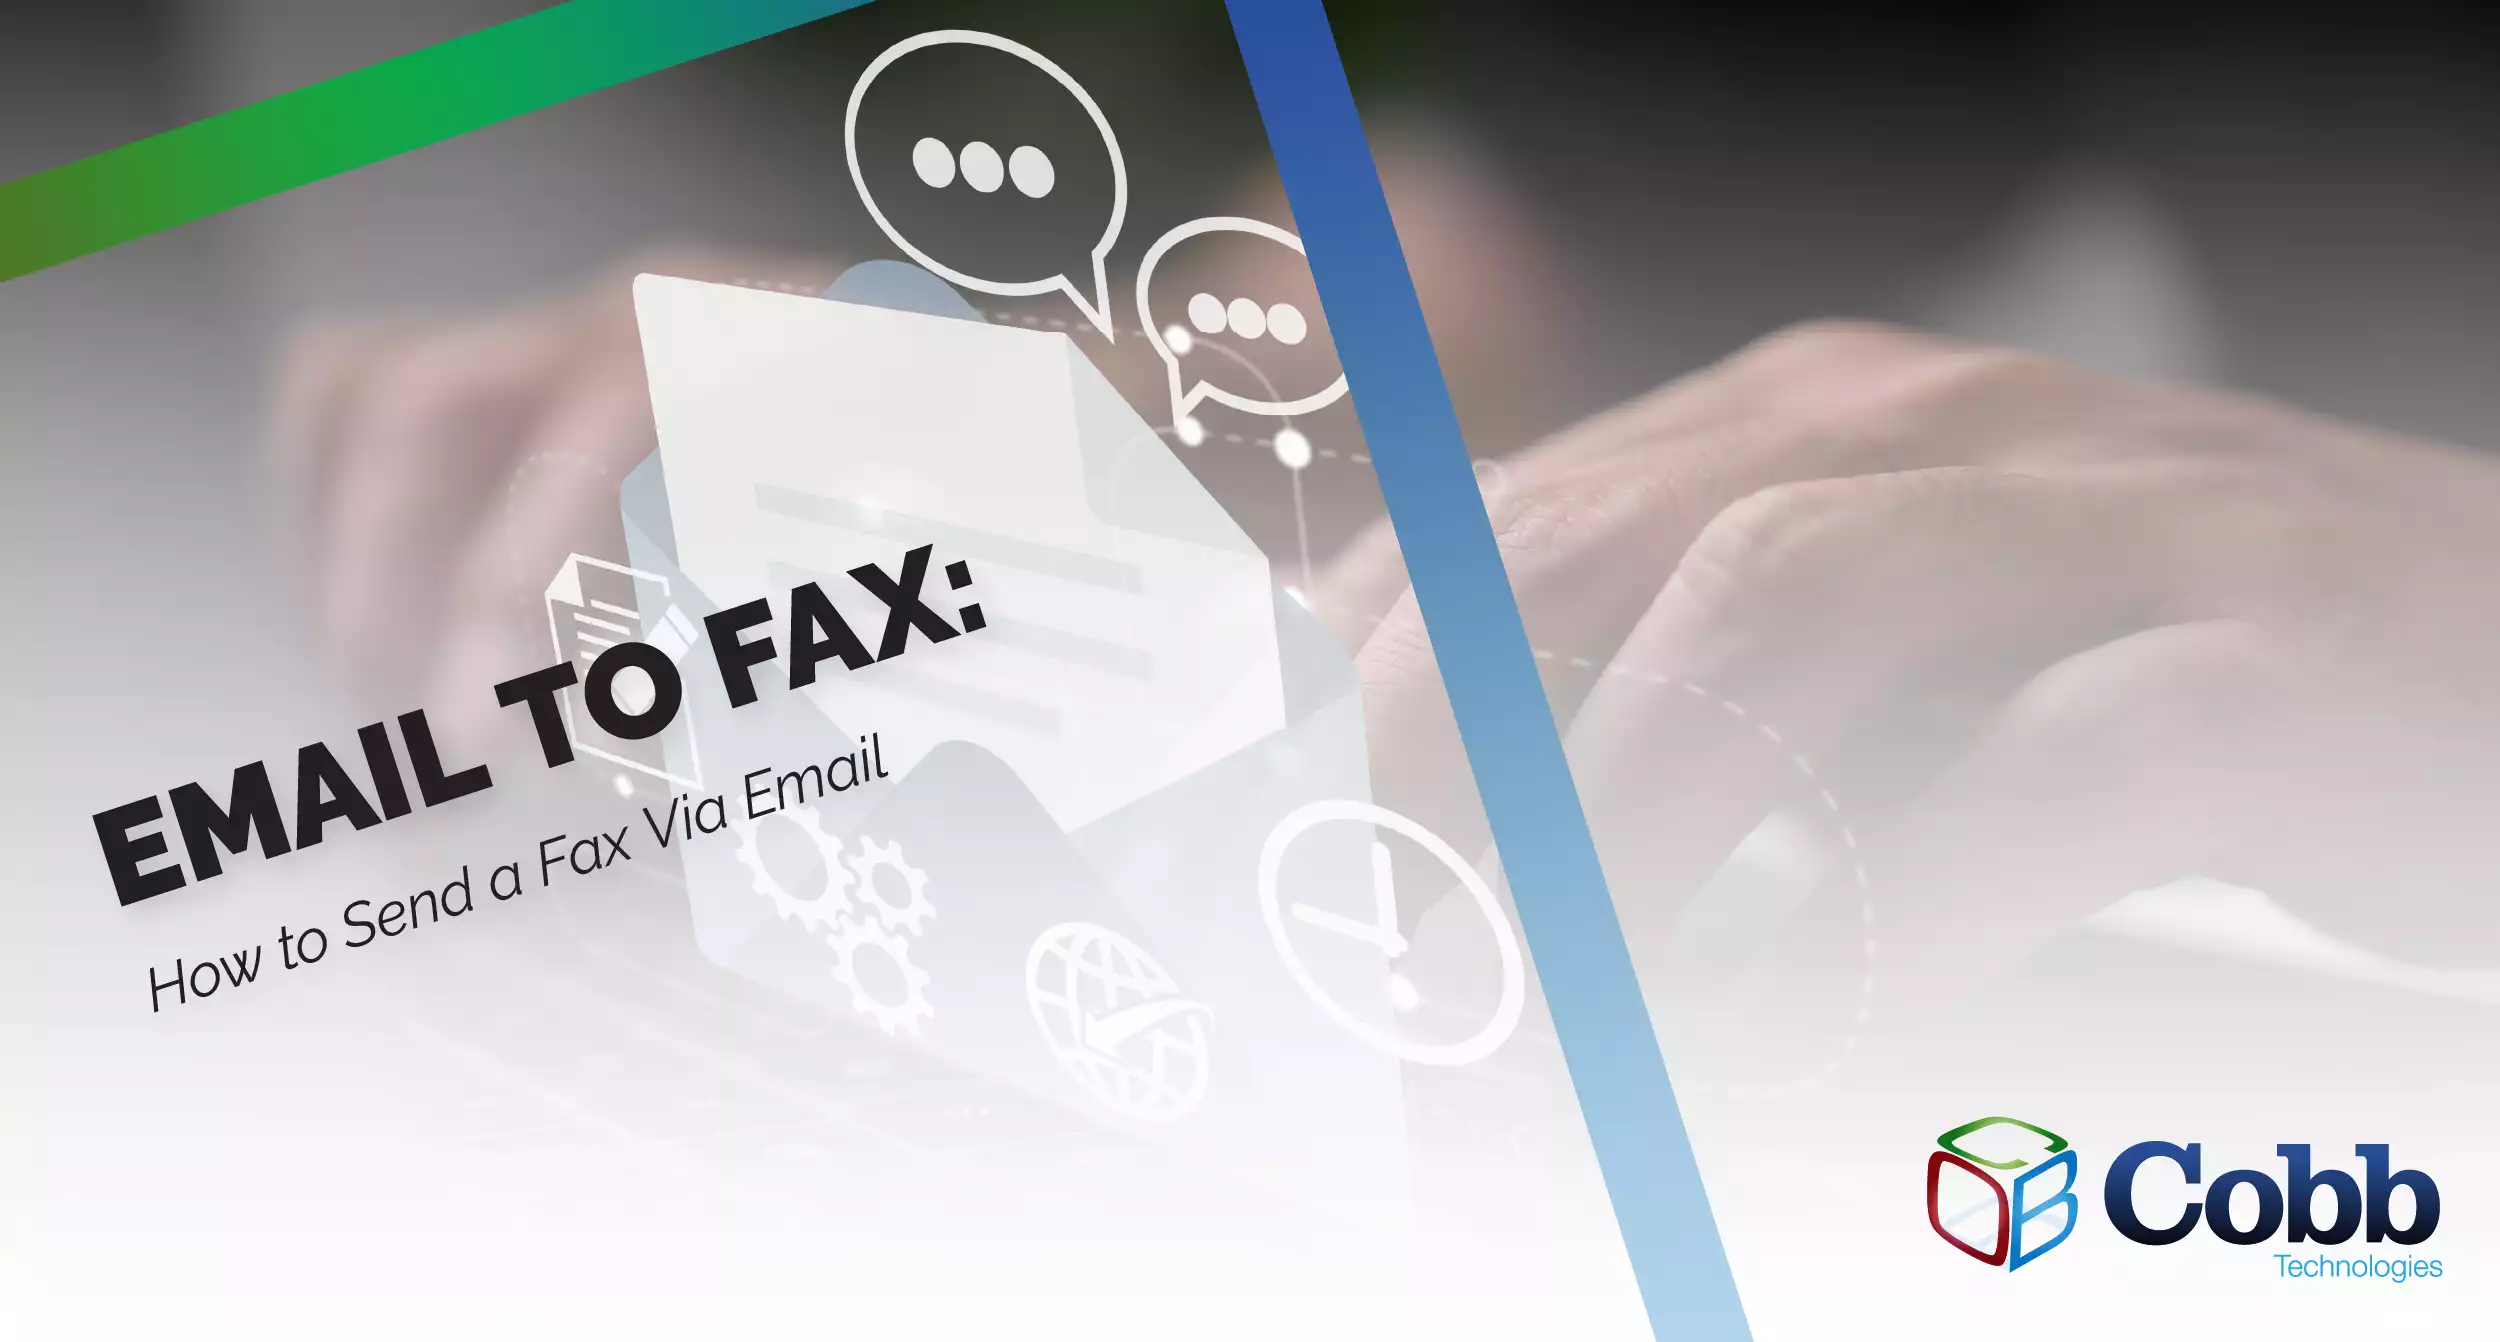 Email to Fax: How to Send a Fax via Email